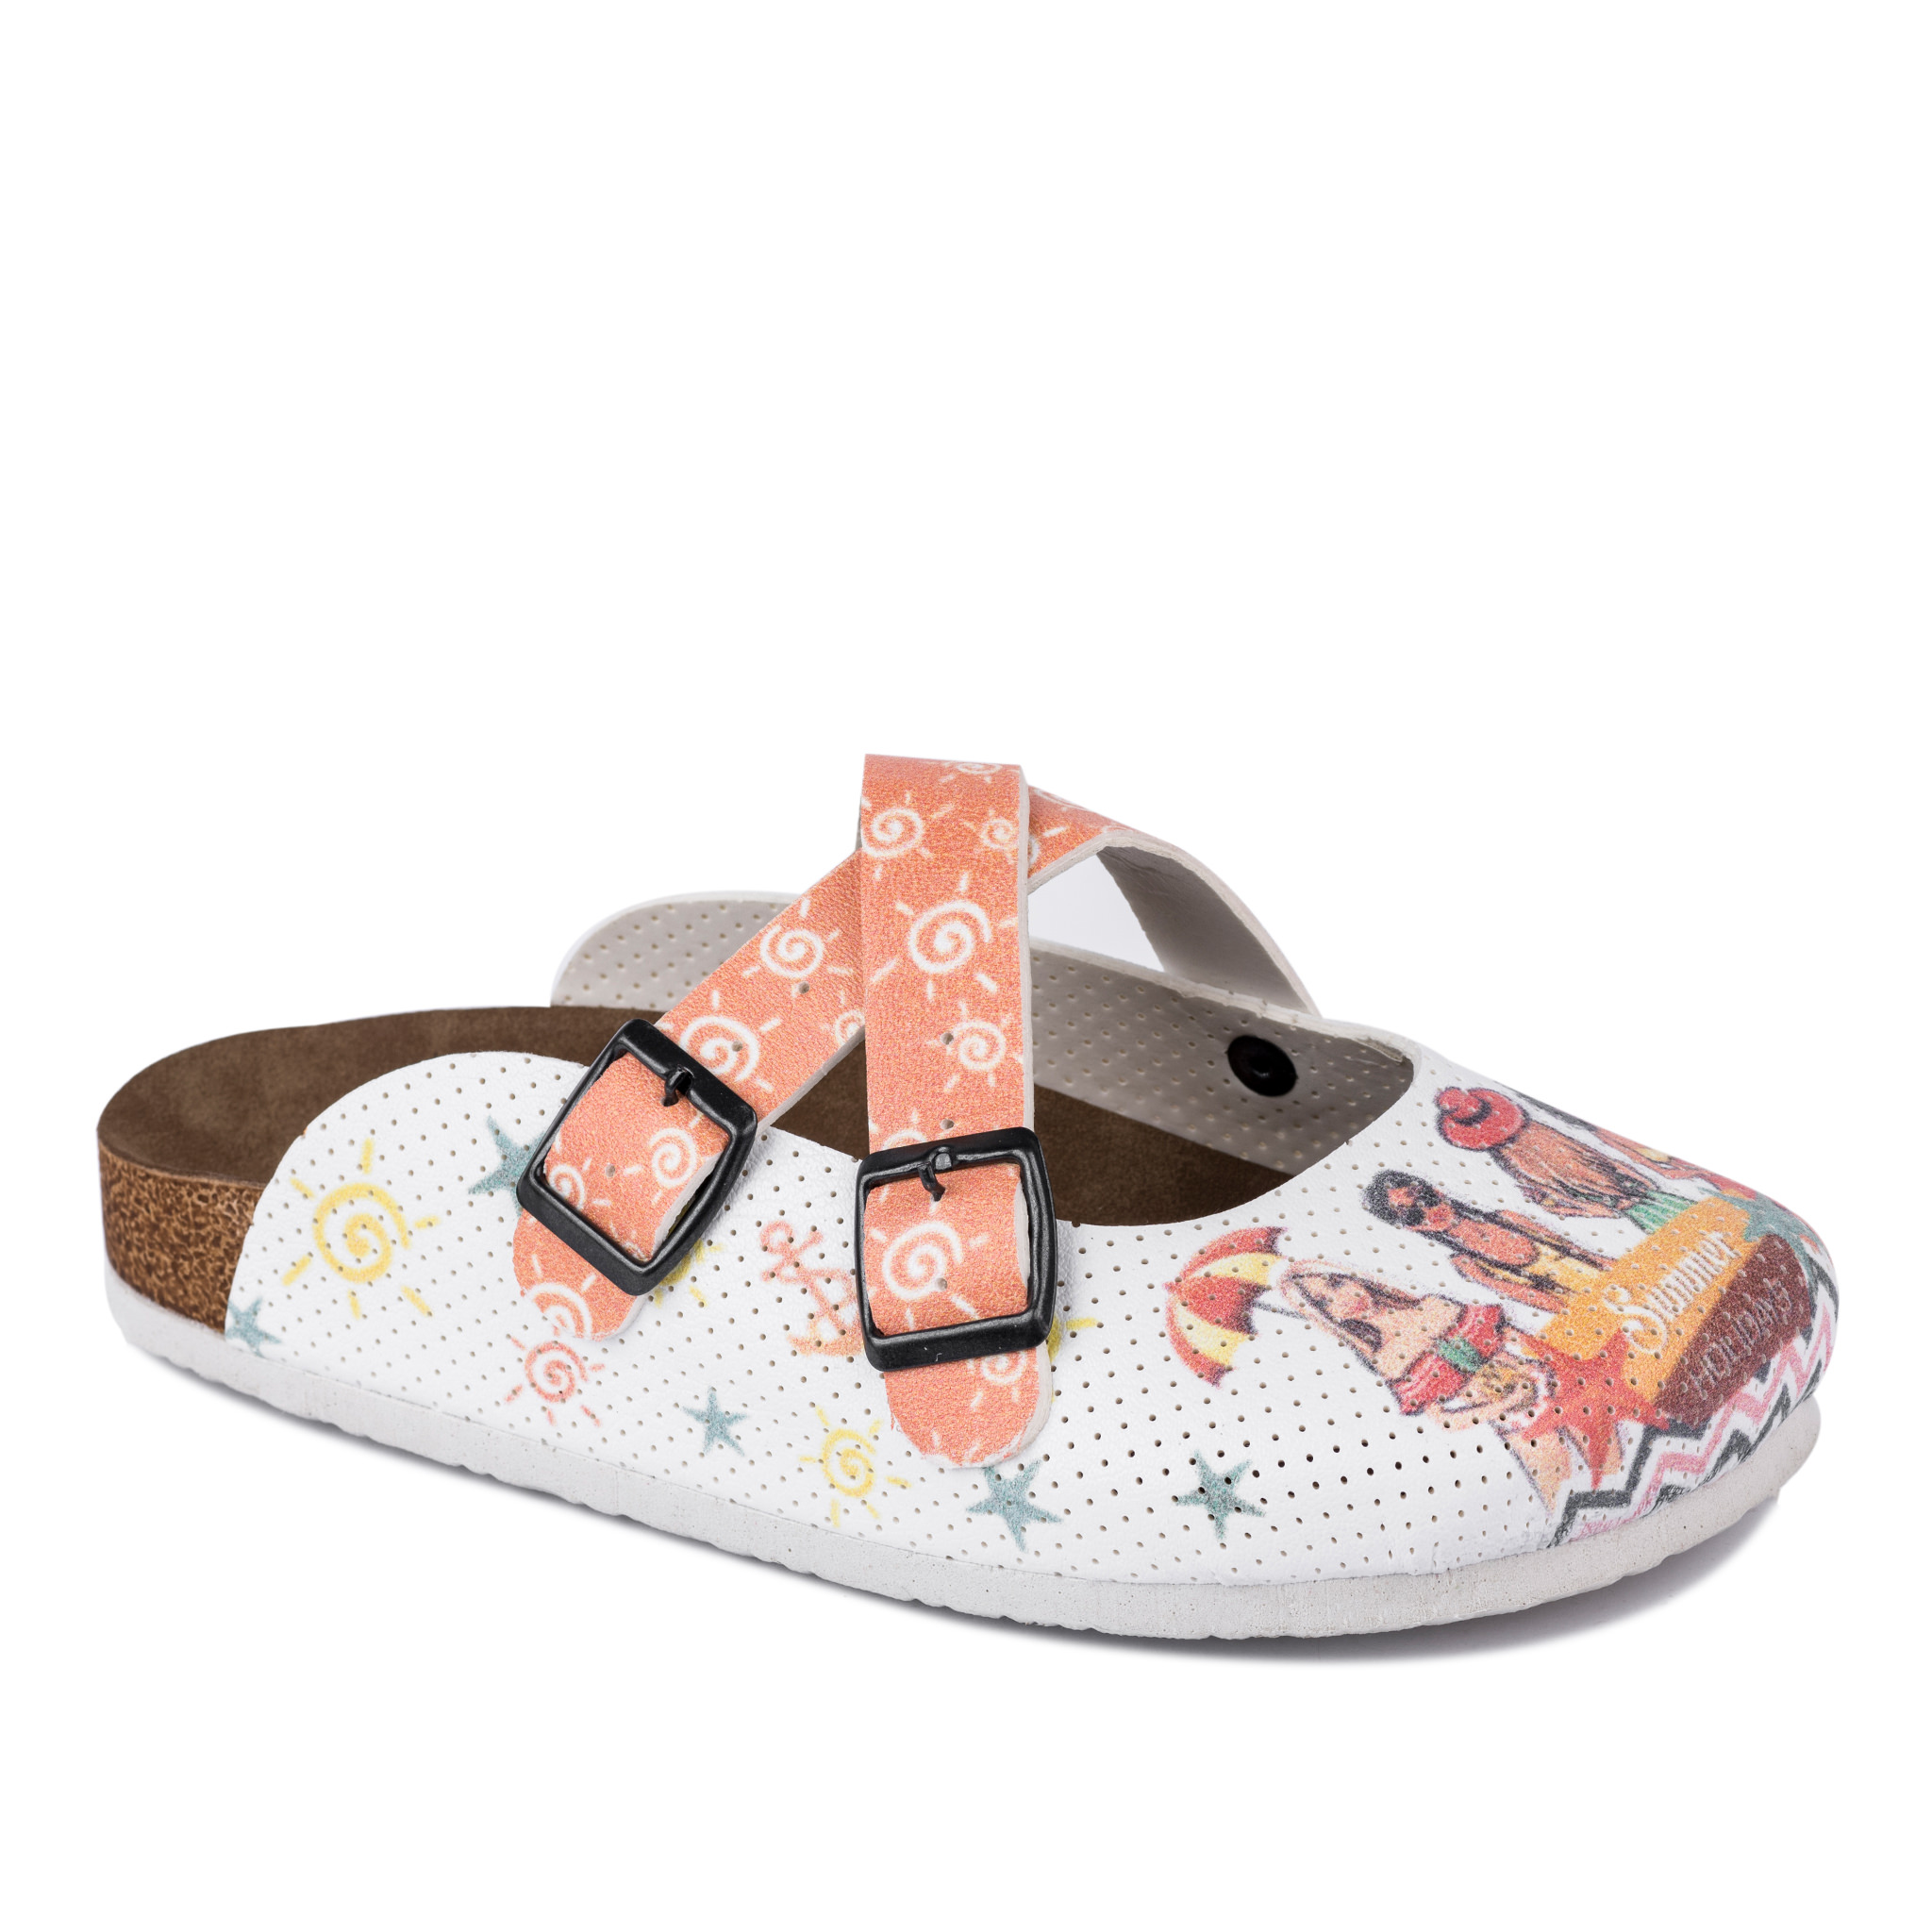 Patterned women clogs A145 - GIRLS - WHITE